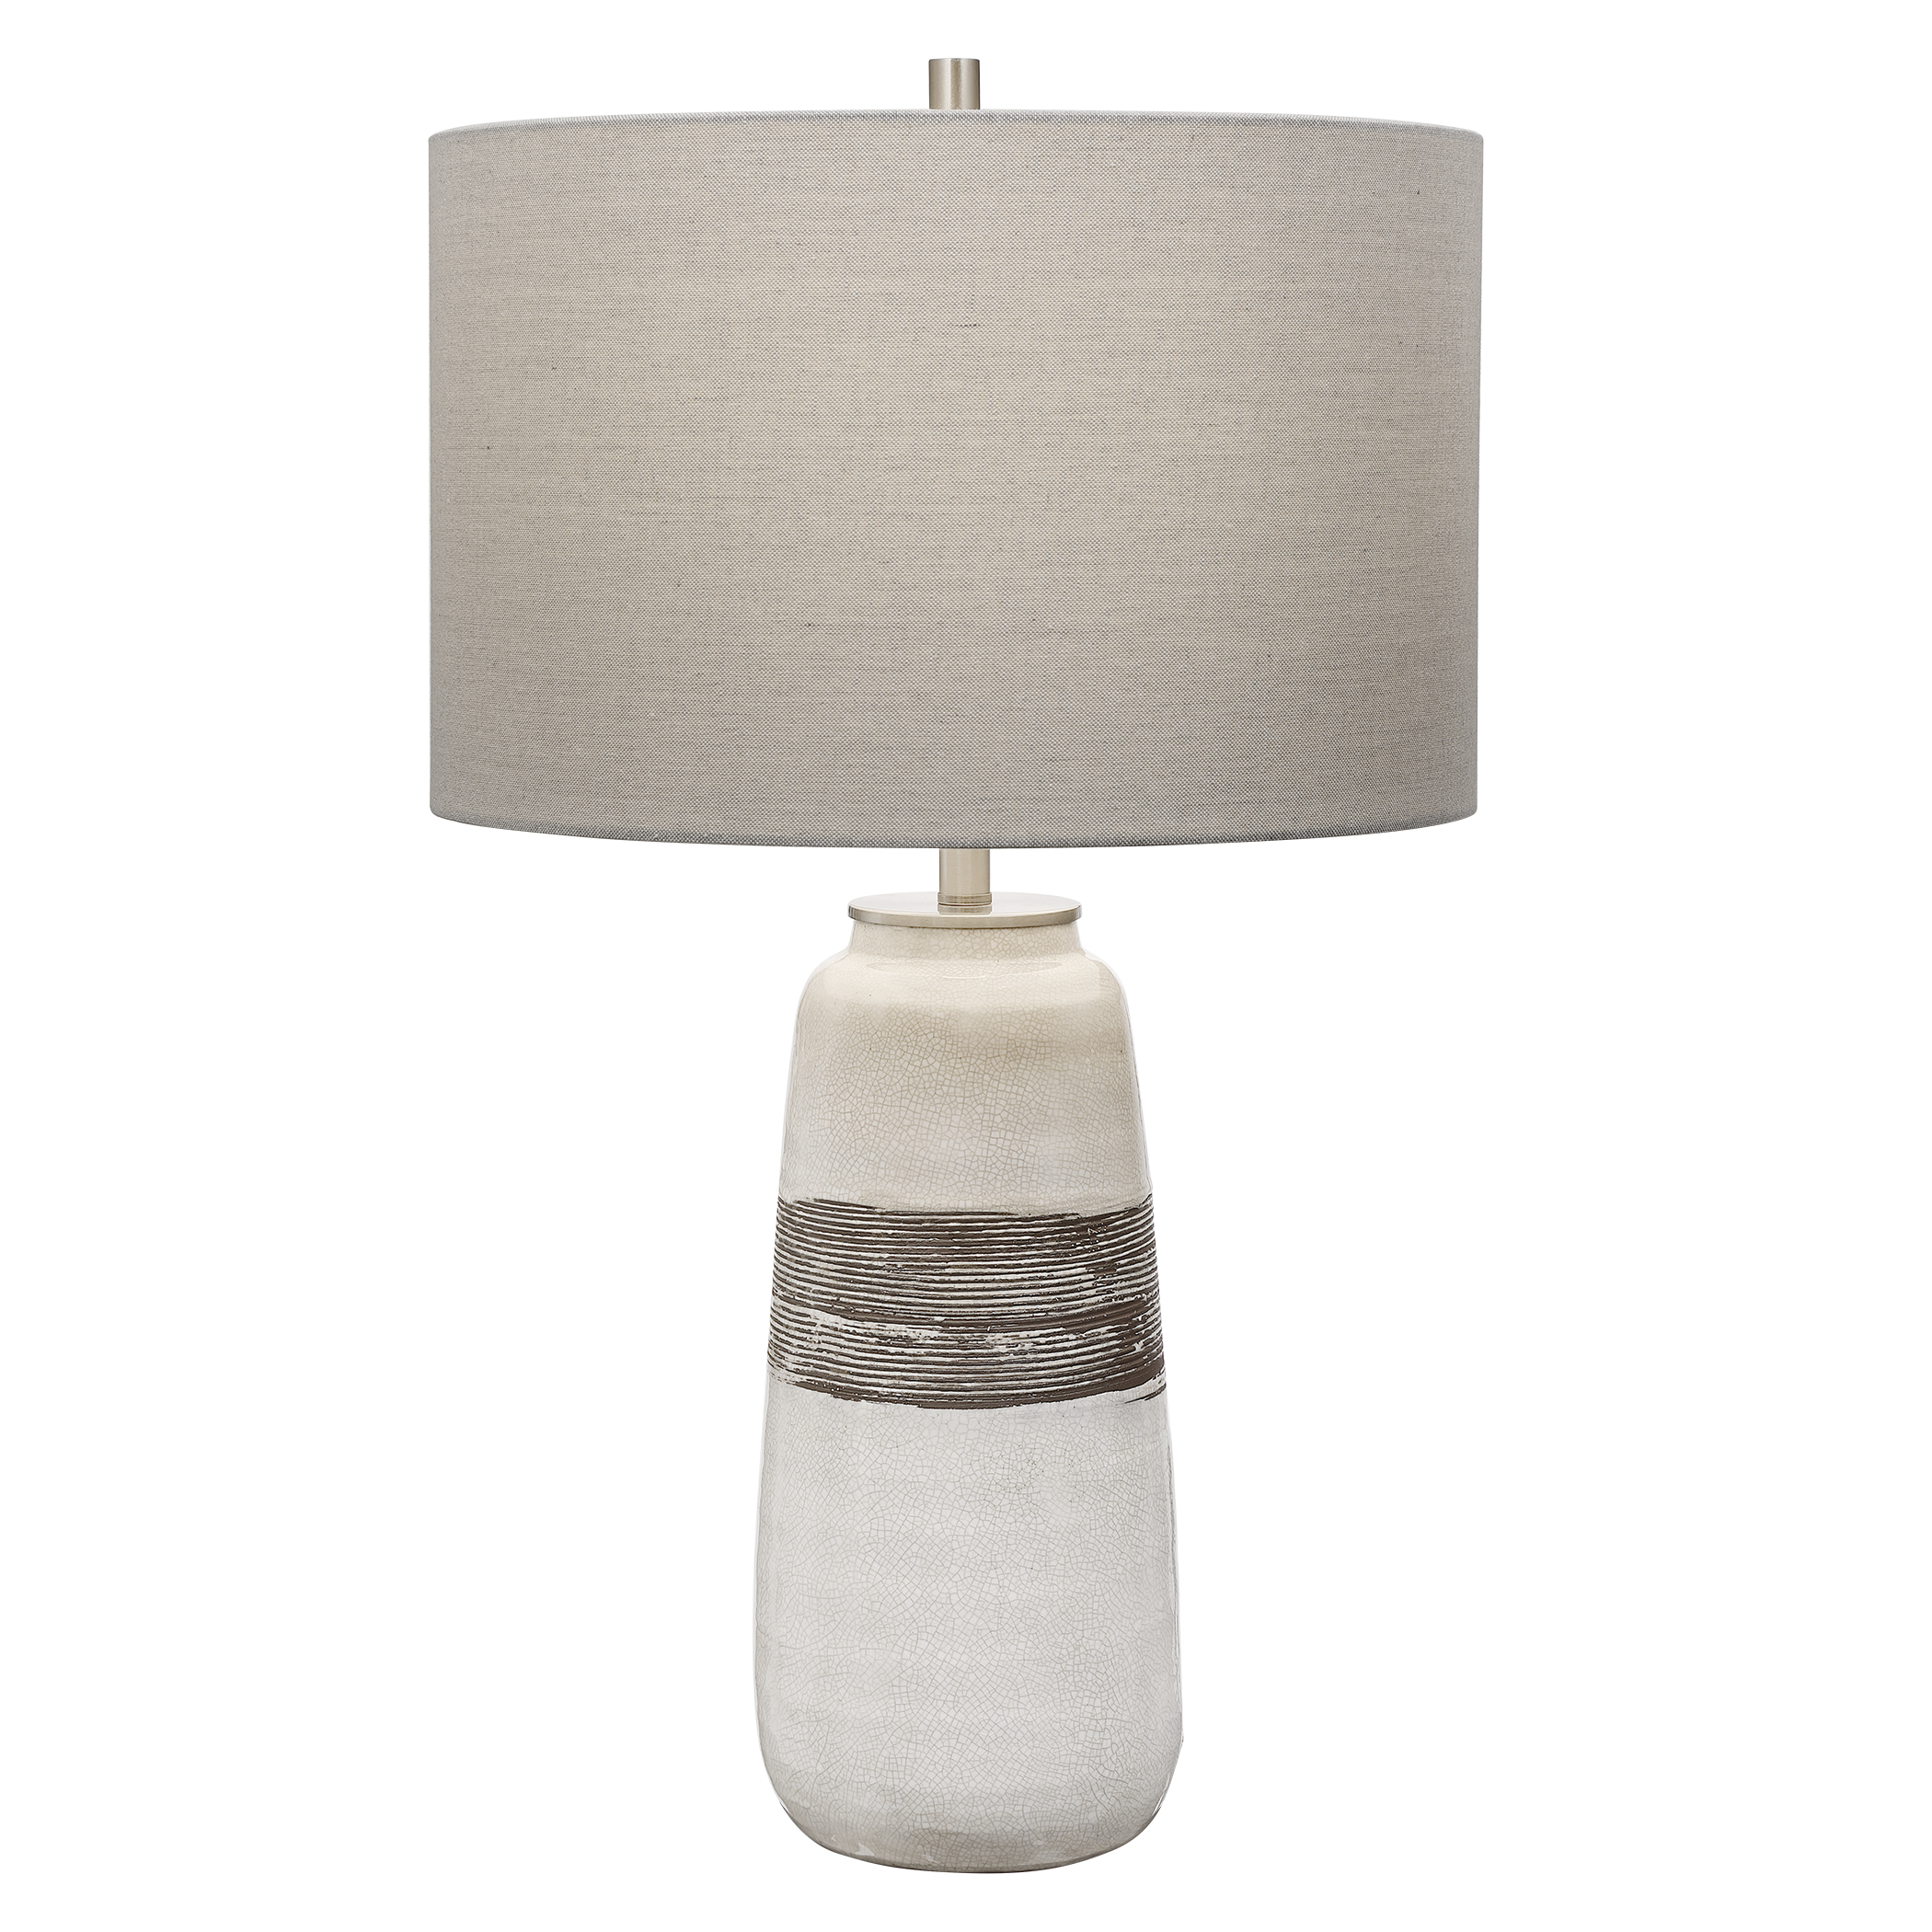 Online Designer Combined Living/Dining Comanche White Crackle Table Lamp